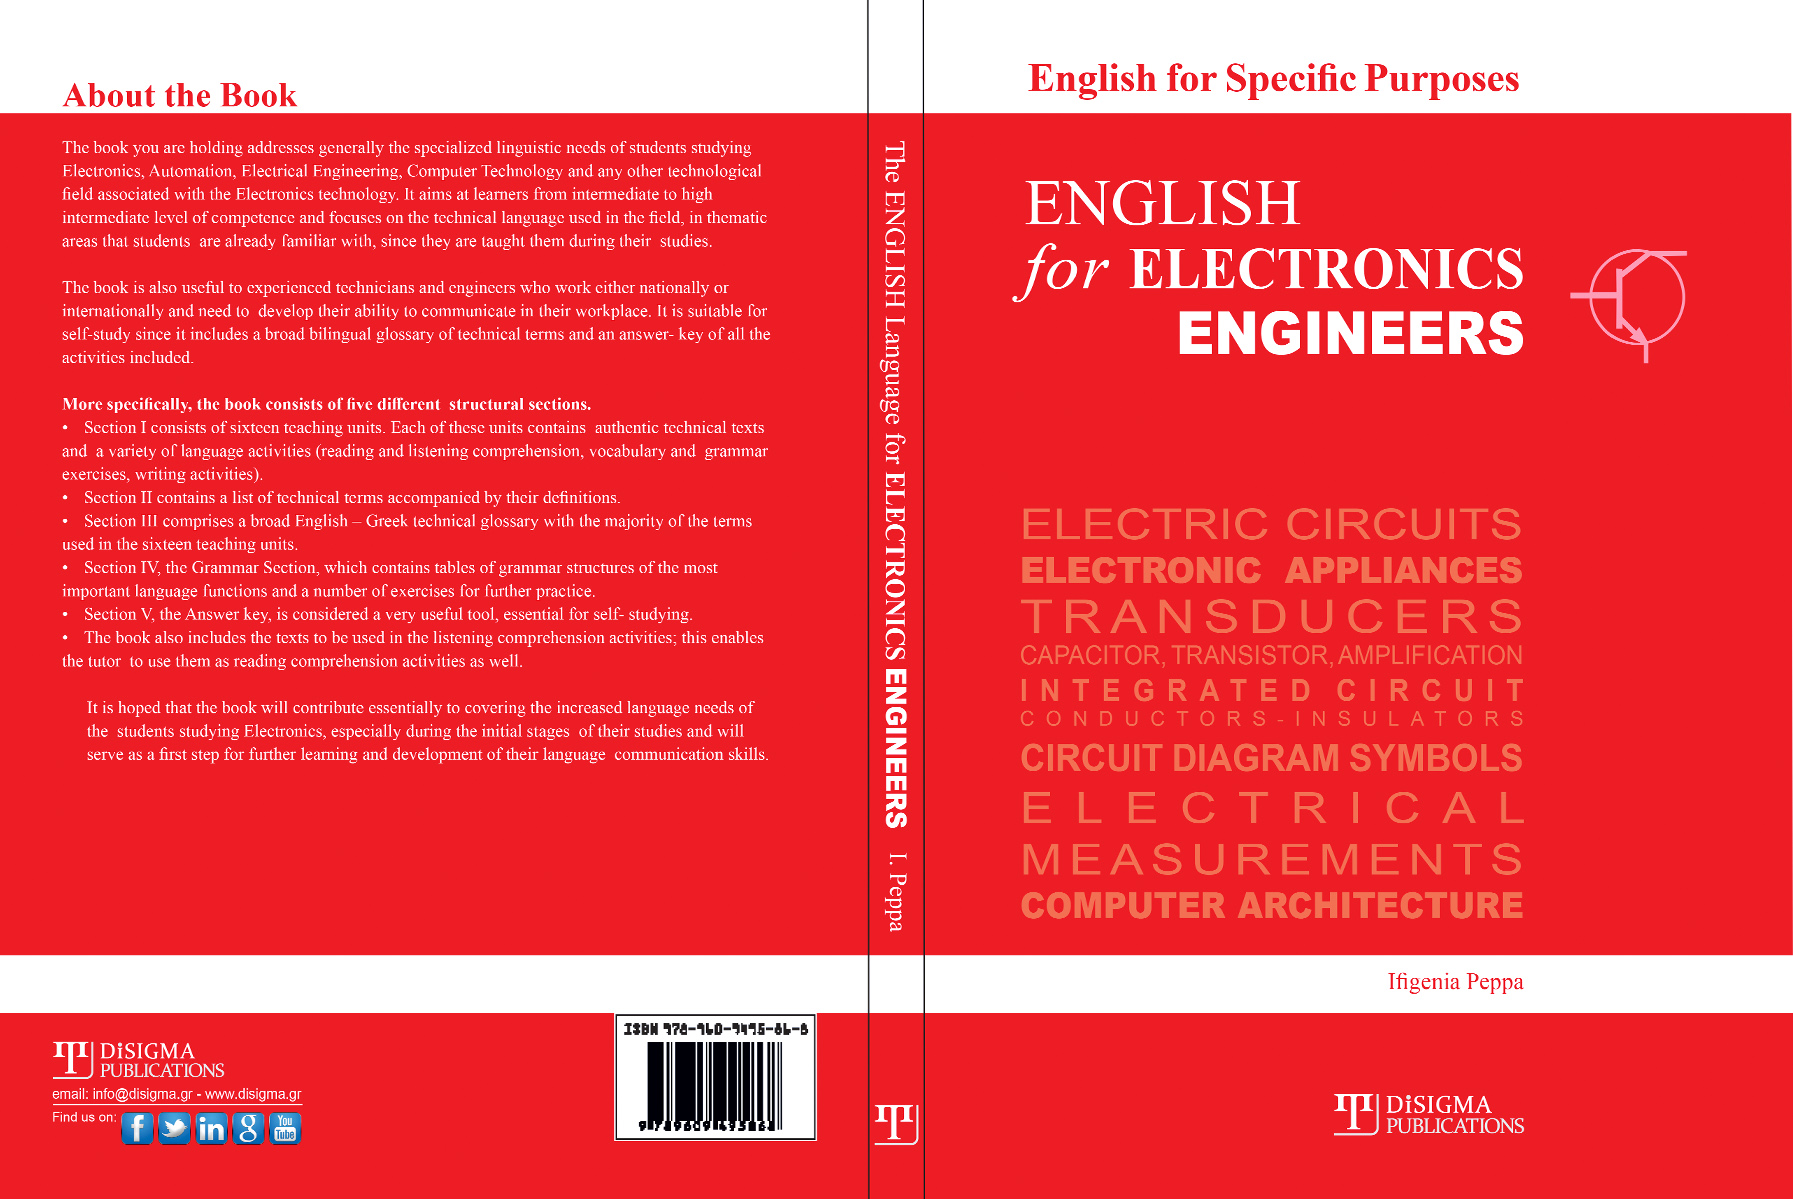 ENGLISH FOR ELECTRONIC ENGINEERS